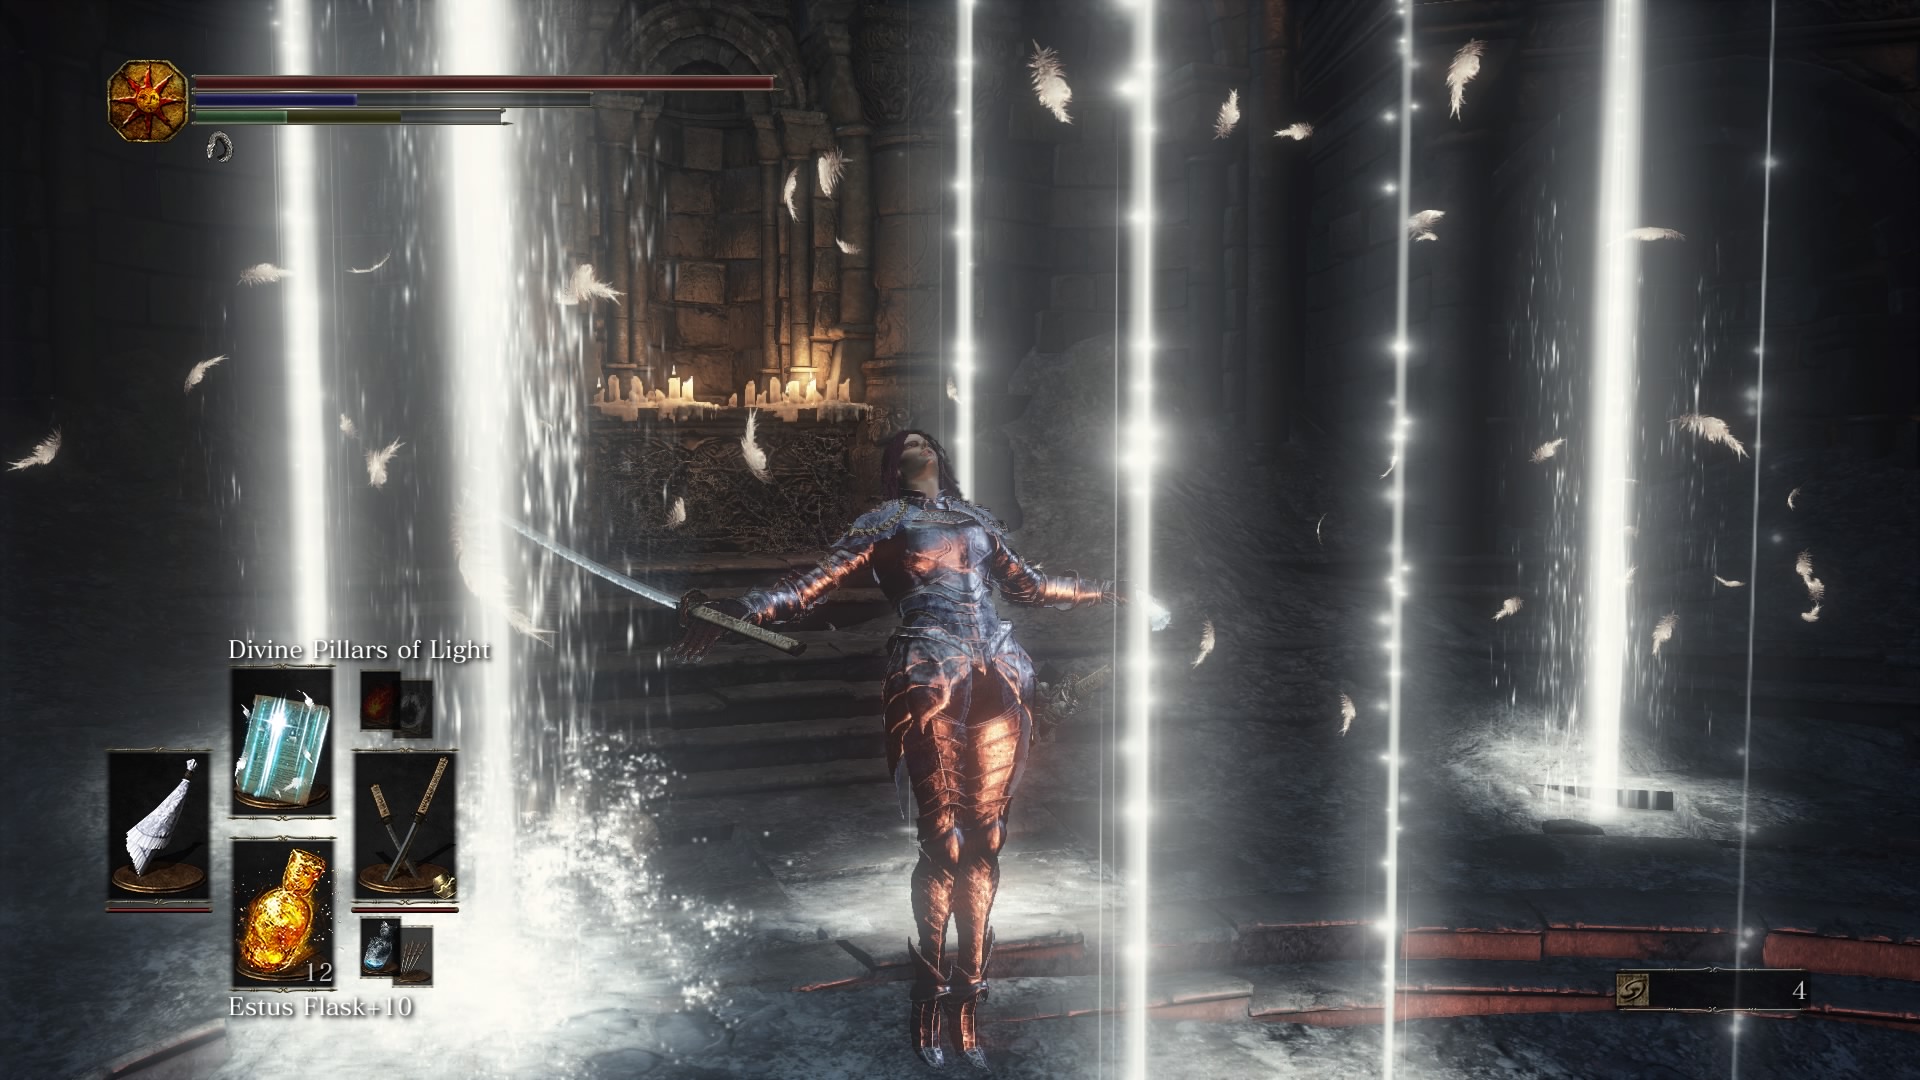 skillvstrate on Twitter: "I'm not a armoring up but is exquisite. #DivinePillarsOfLight #DarkSouls3 #DS3 #PS4share https://t.co/ziiHvAFo8K" / Twitter